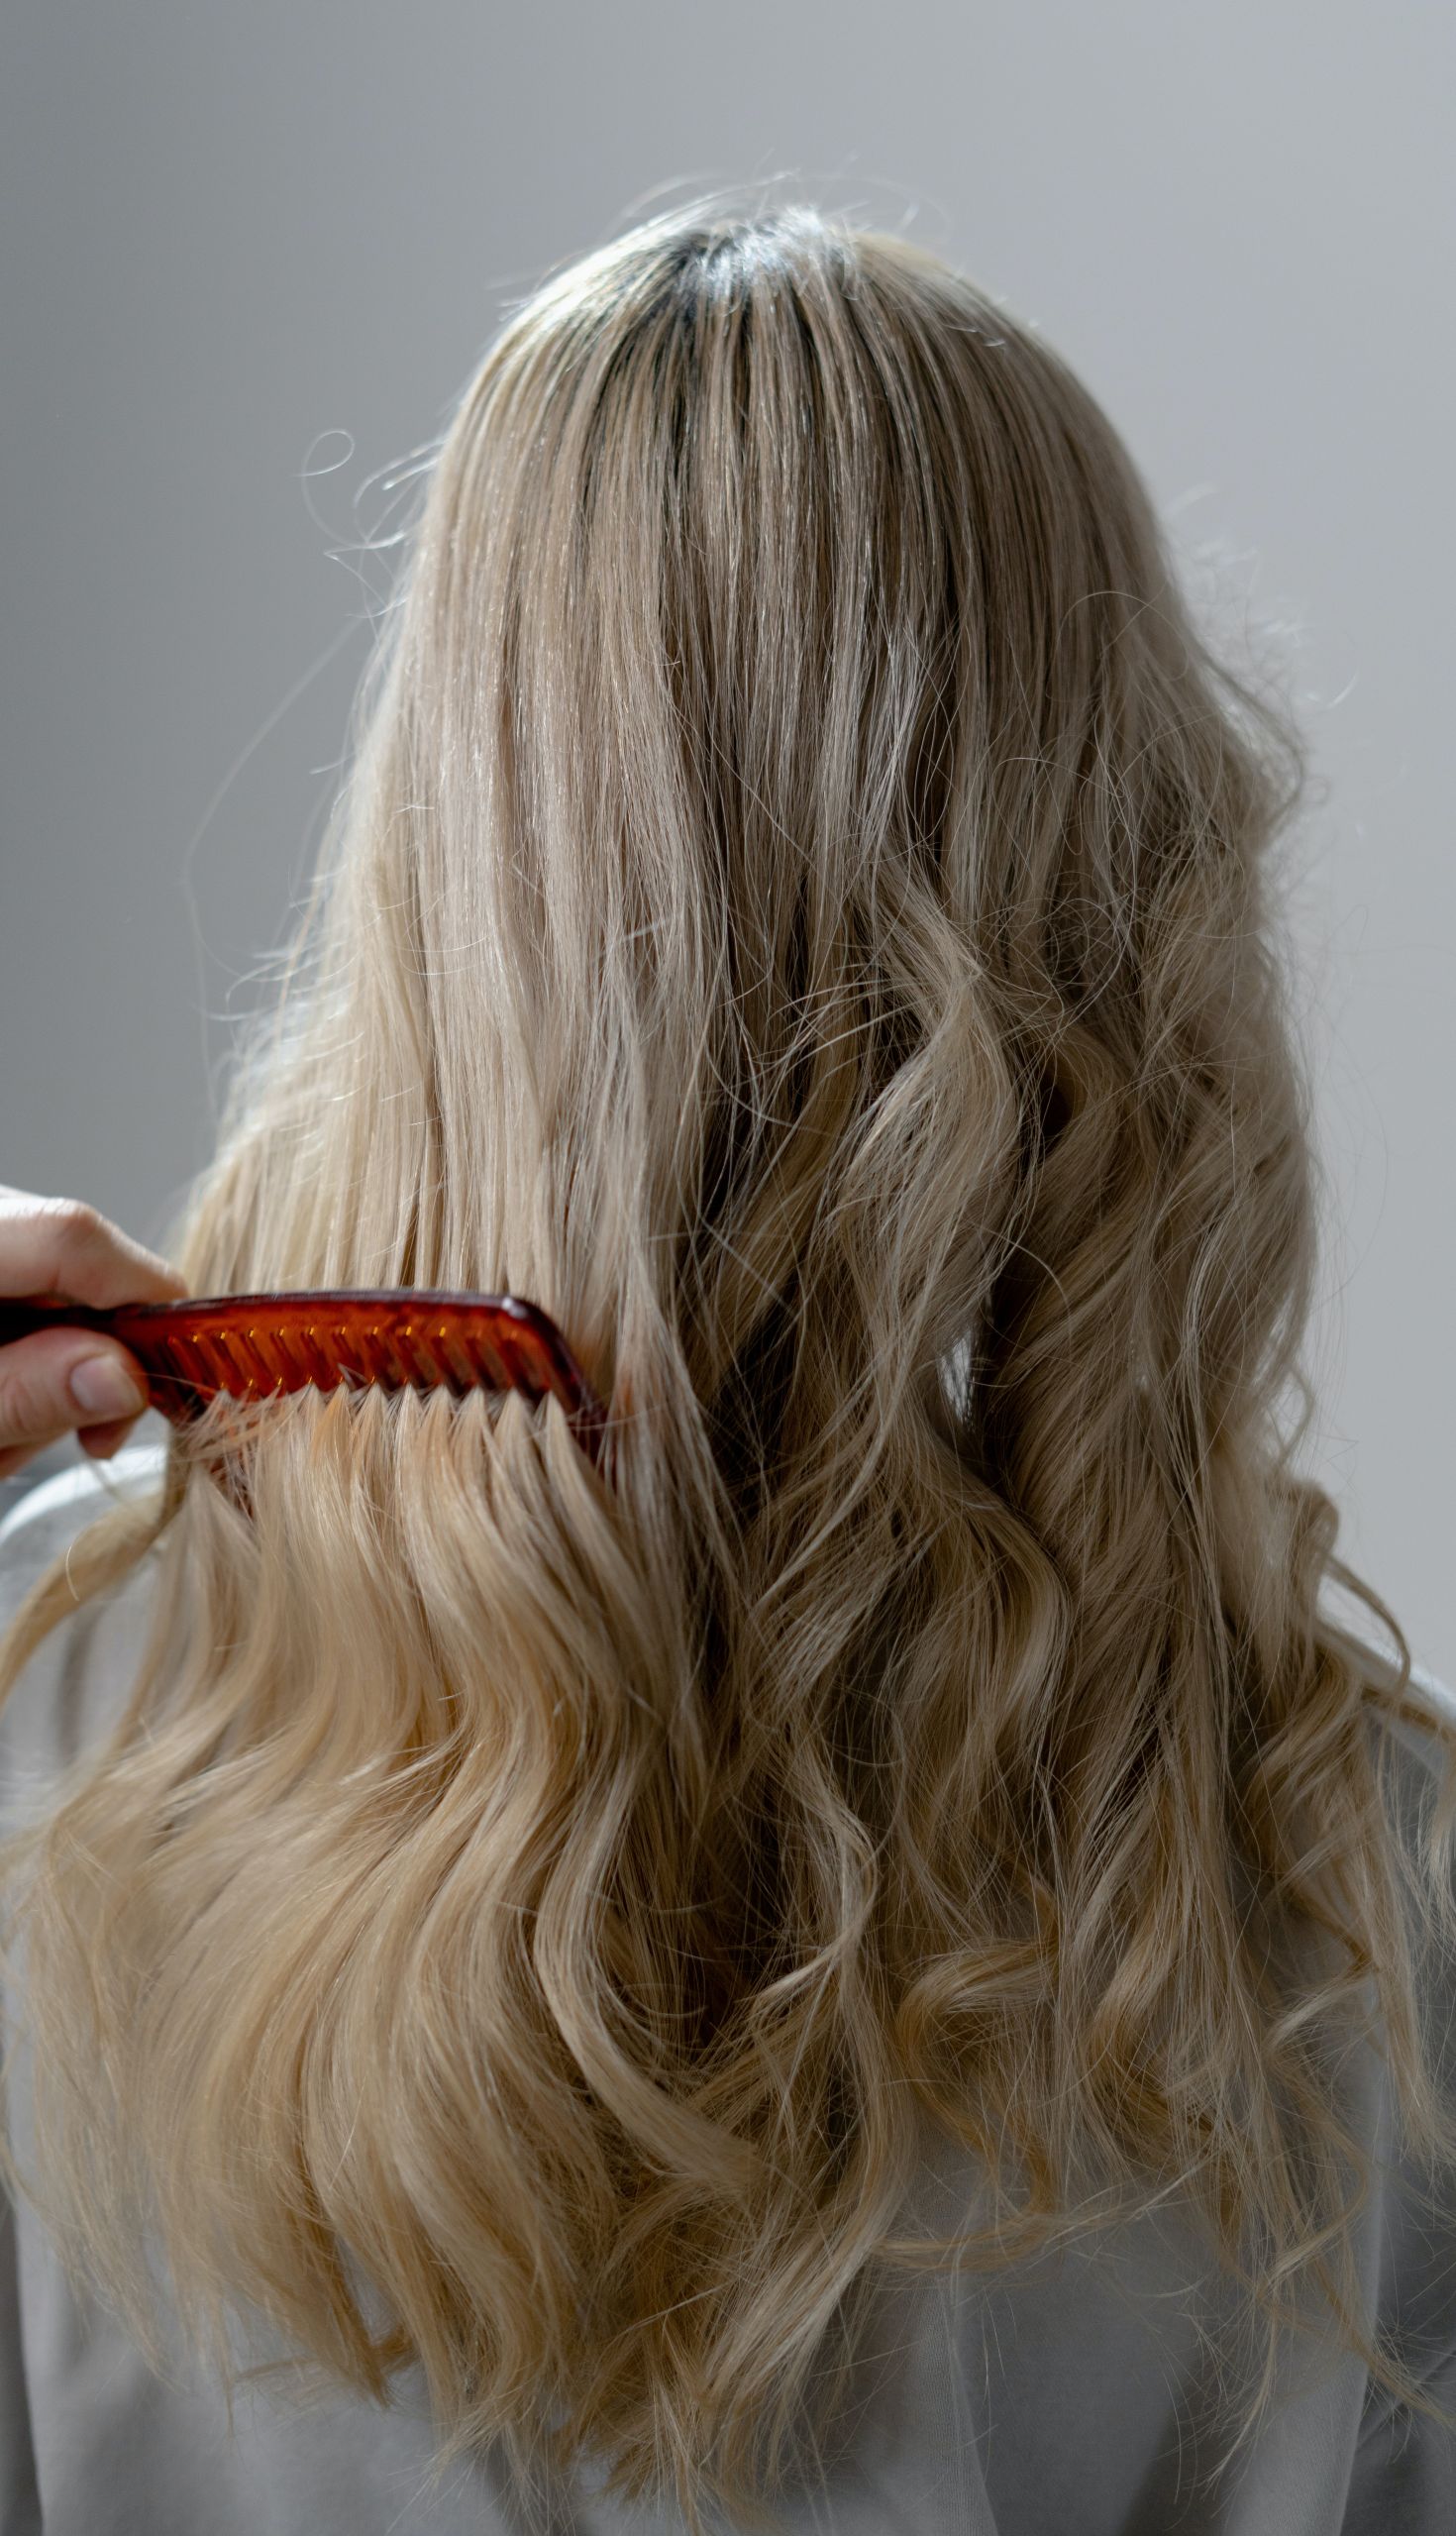 What do you do to keep your hair soft and shiny?